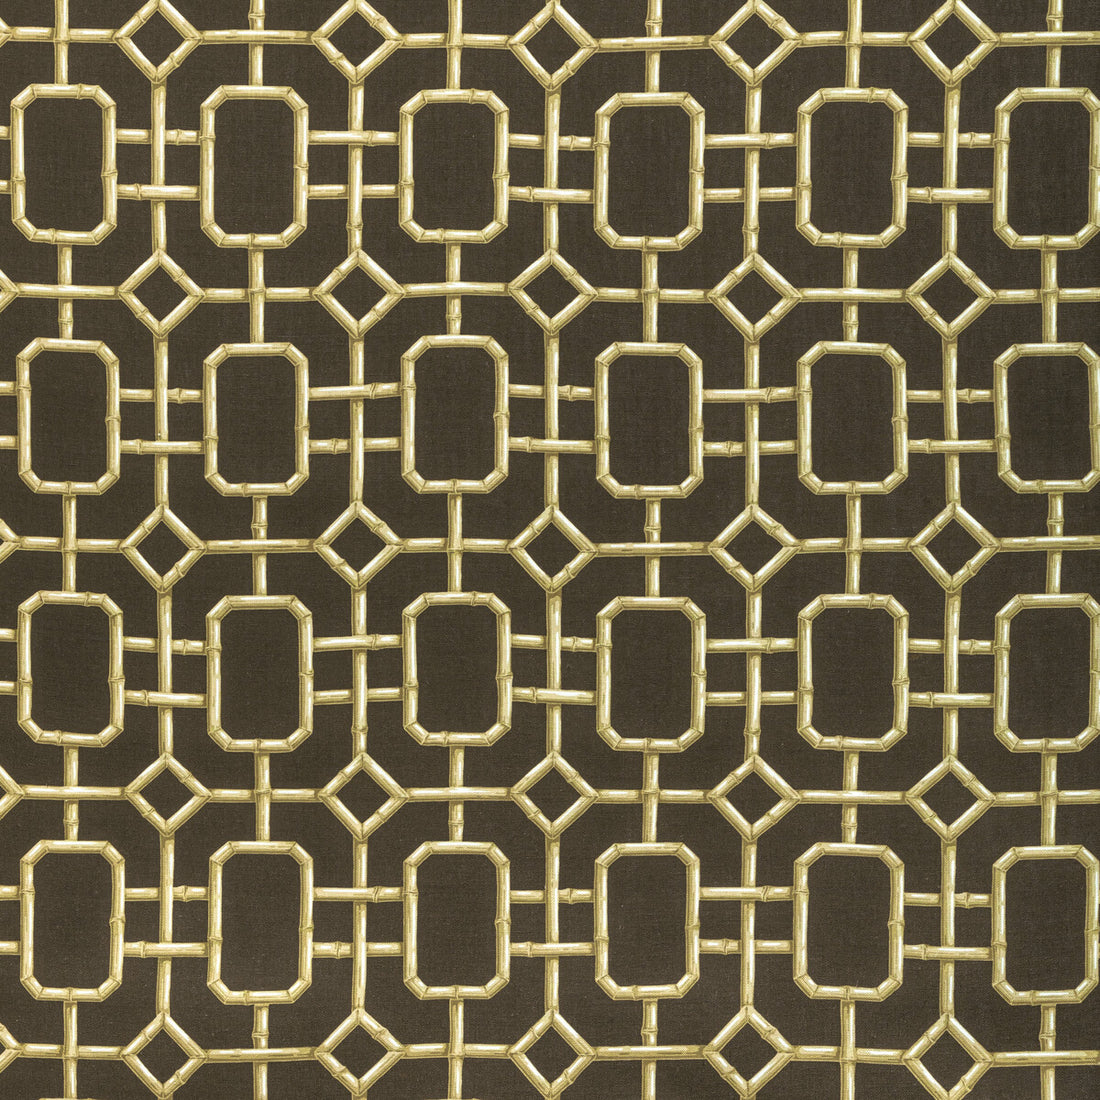 Bambu Fret fabric in hickory color - pattern BAMBU FRET.64.0 - by Kravet Couture in the Jan Showers Charmant collection